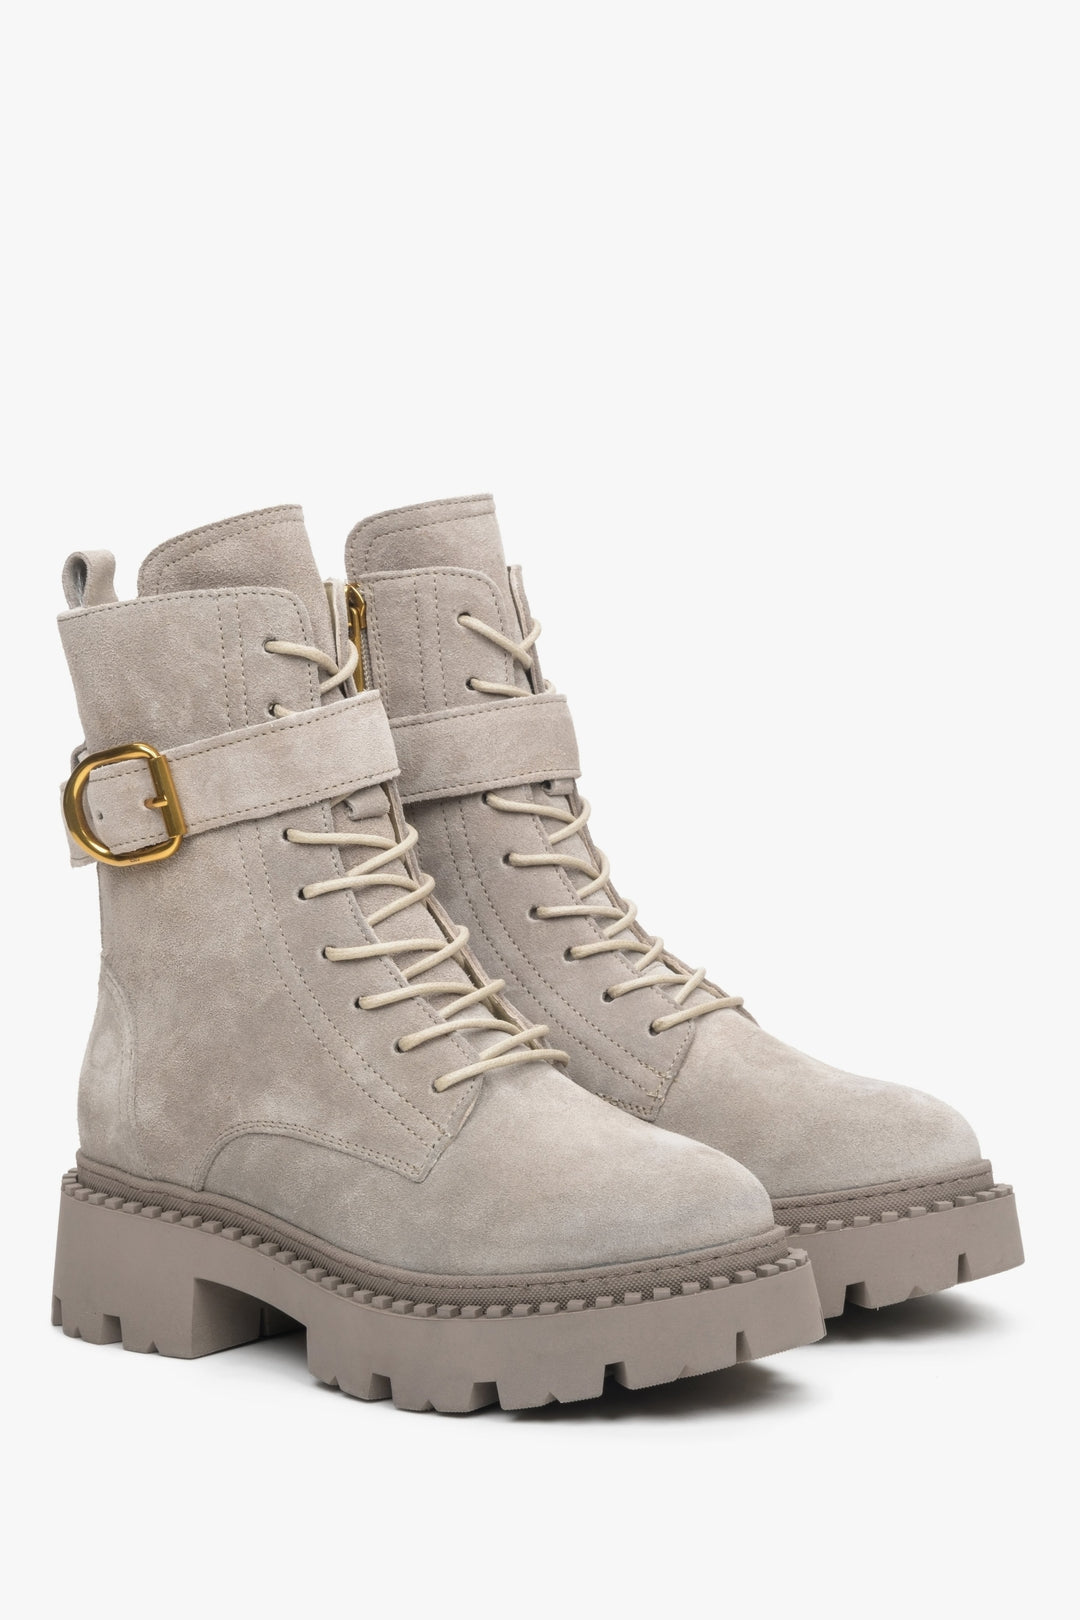 Women's Light Grey Winter Boots made of Genuine Velour with a Strap Estro  ER00113911